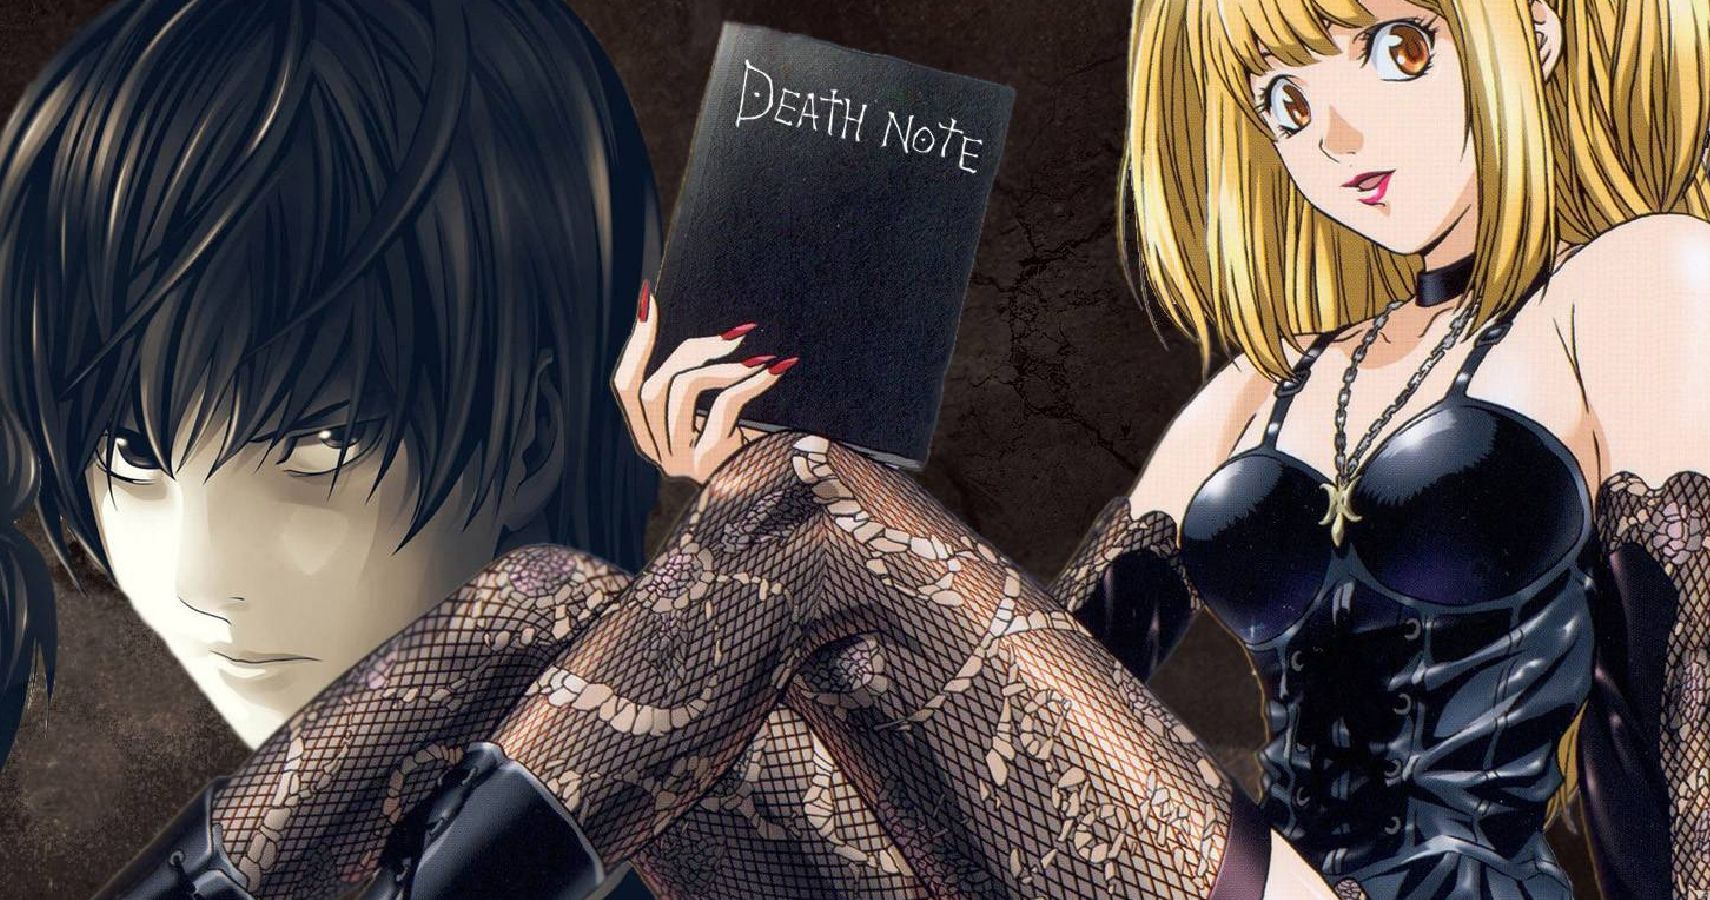 Secrets The Creators Of Death Note Want To Bury